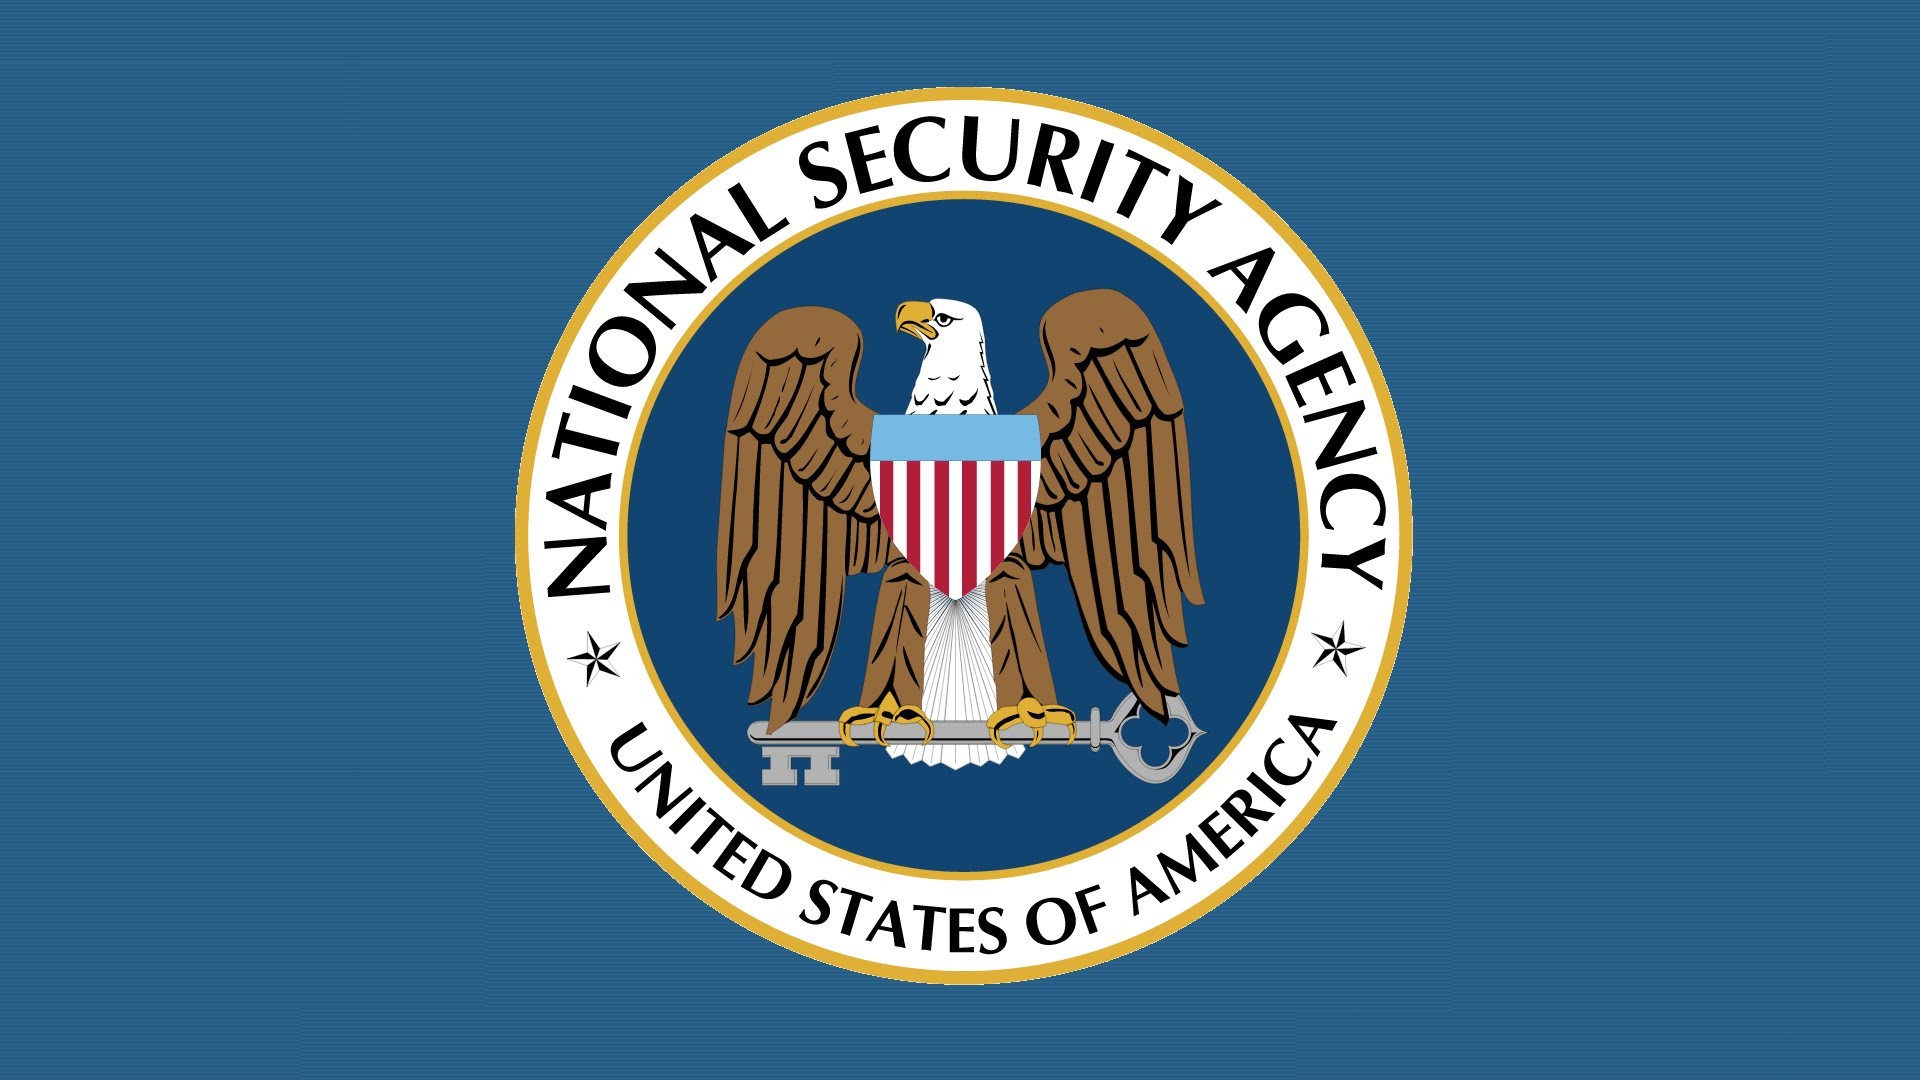 General 1920x1080 NSA simple background minimalism logo eagle animals blue background shield National Security Agency